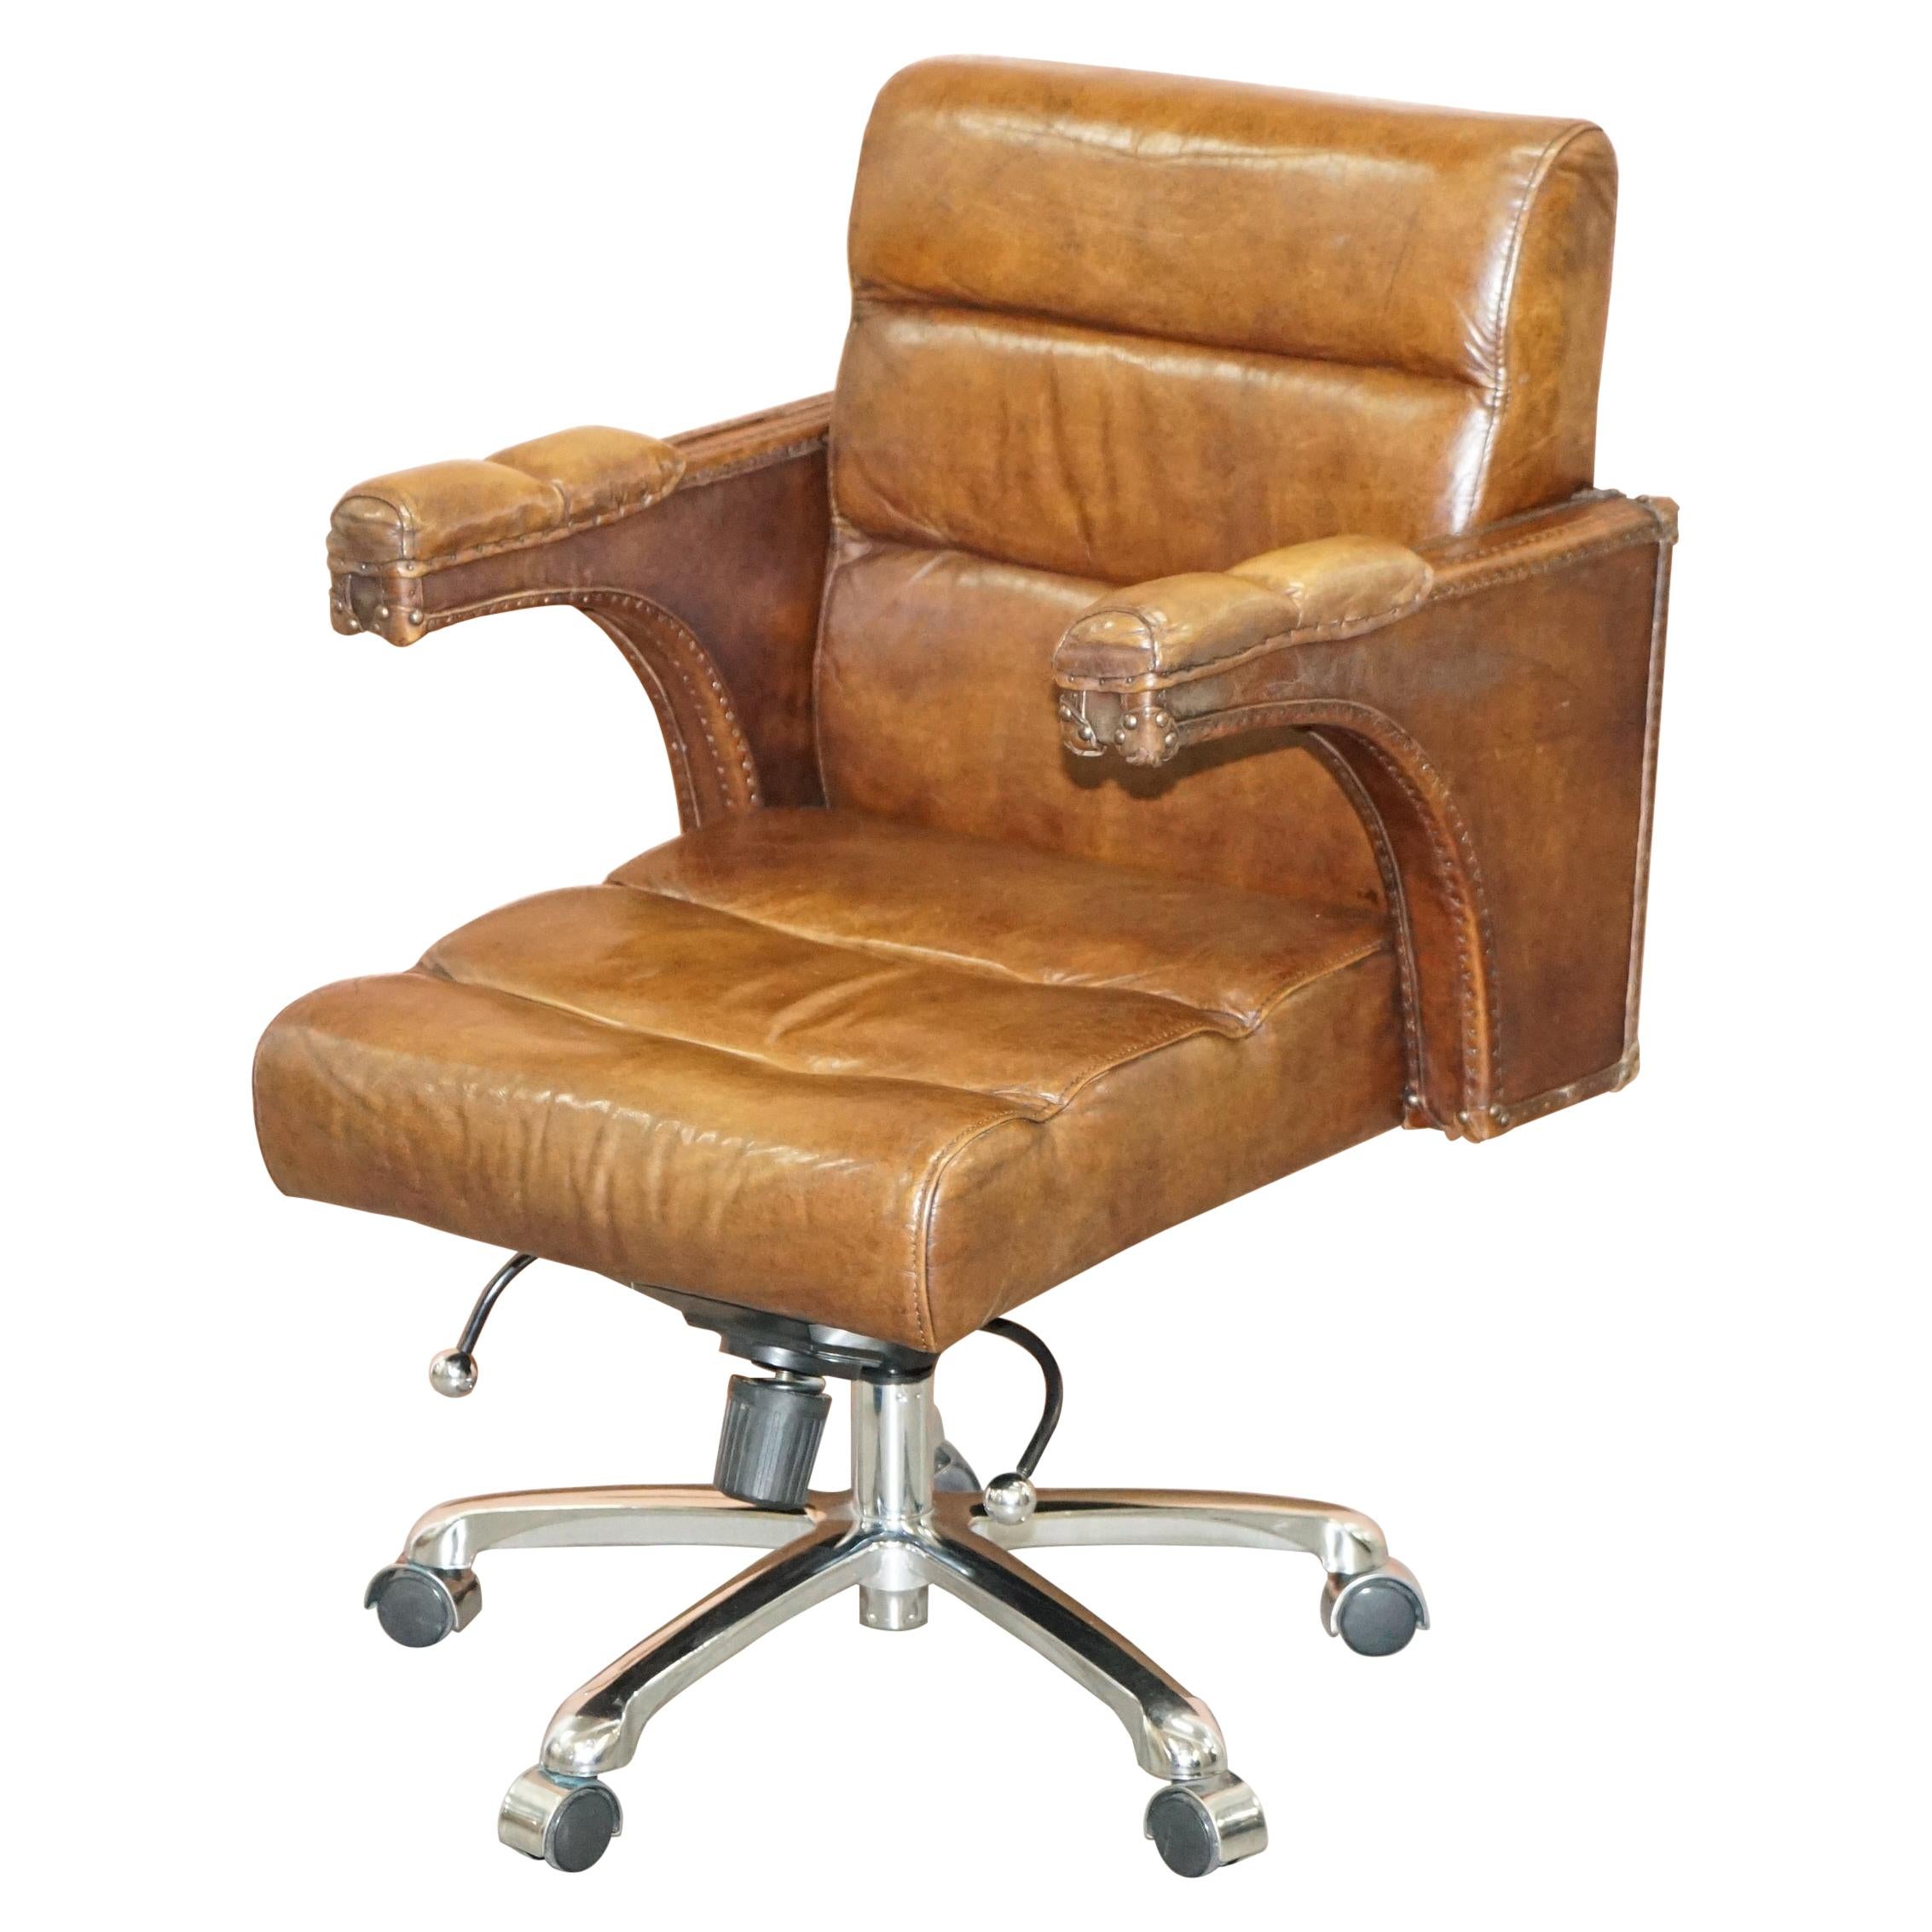 Stunning Aged Saddle Tan Brown Leather Office Desk Captains Directors Armchair